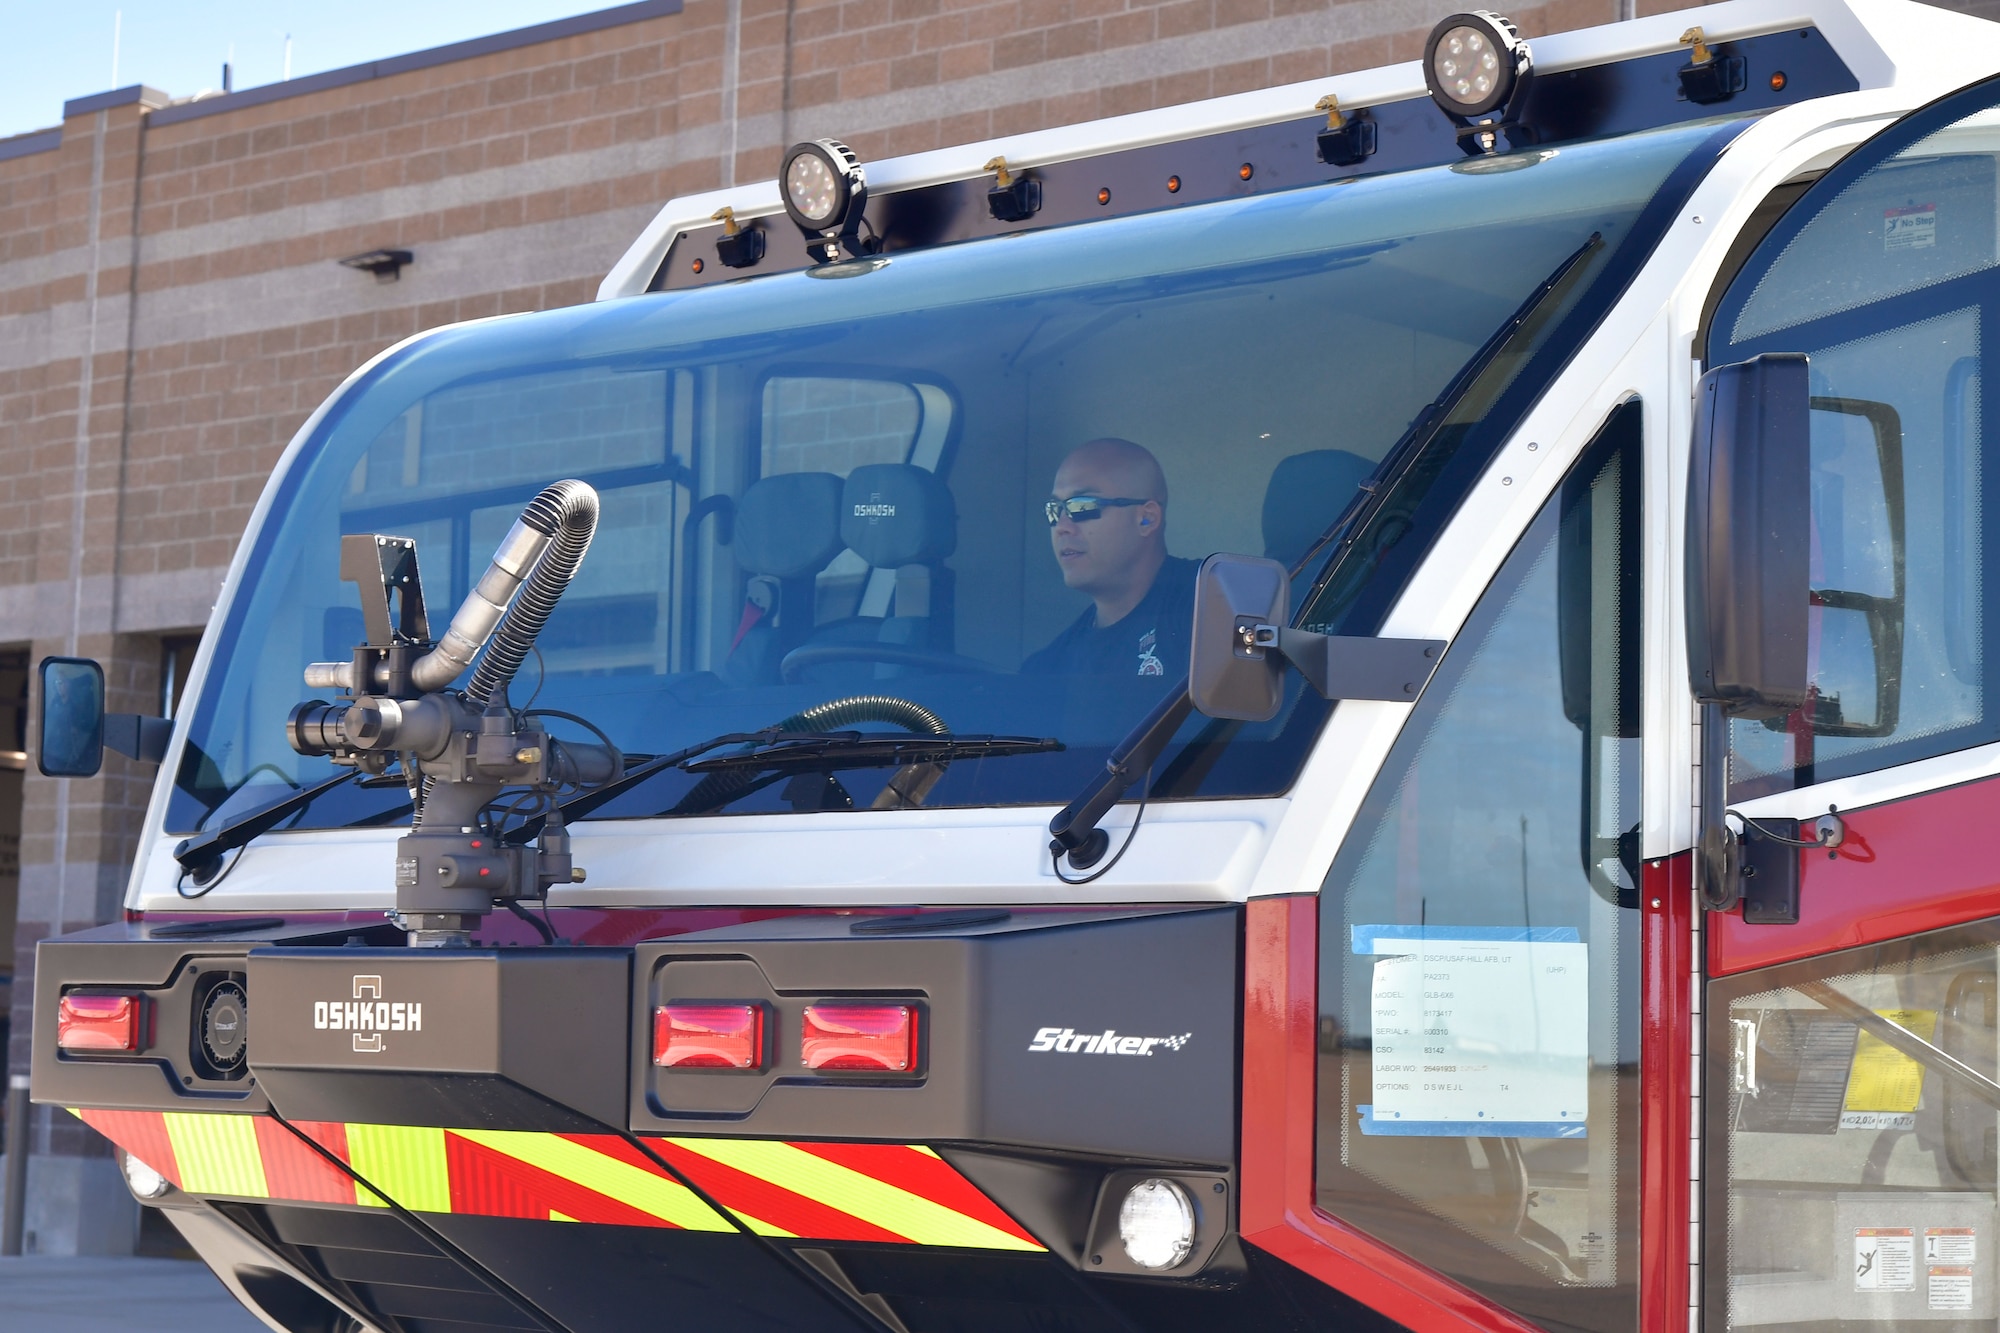 A firefighter sits in the cab of a new crash/fire response vehicle.